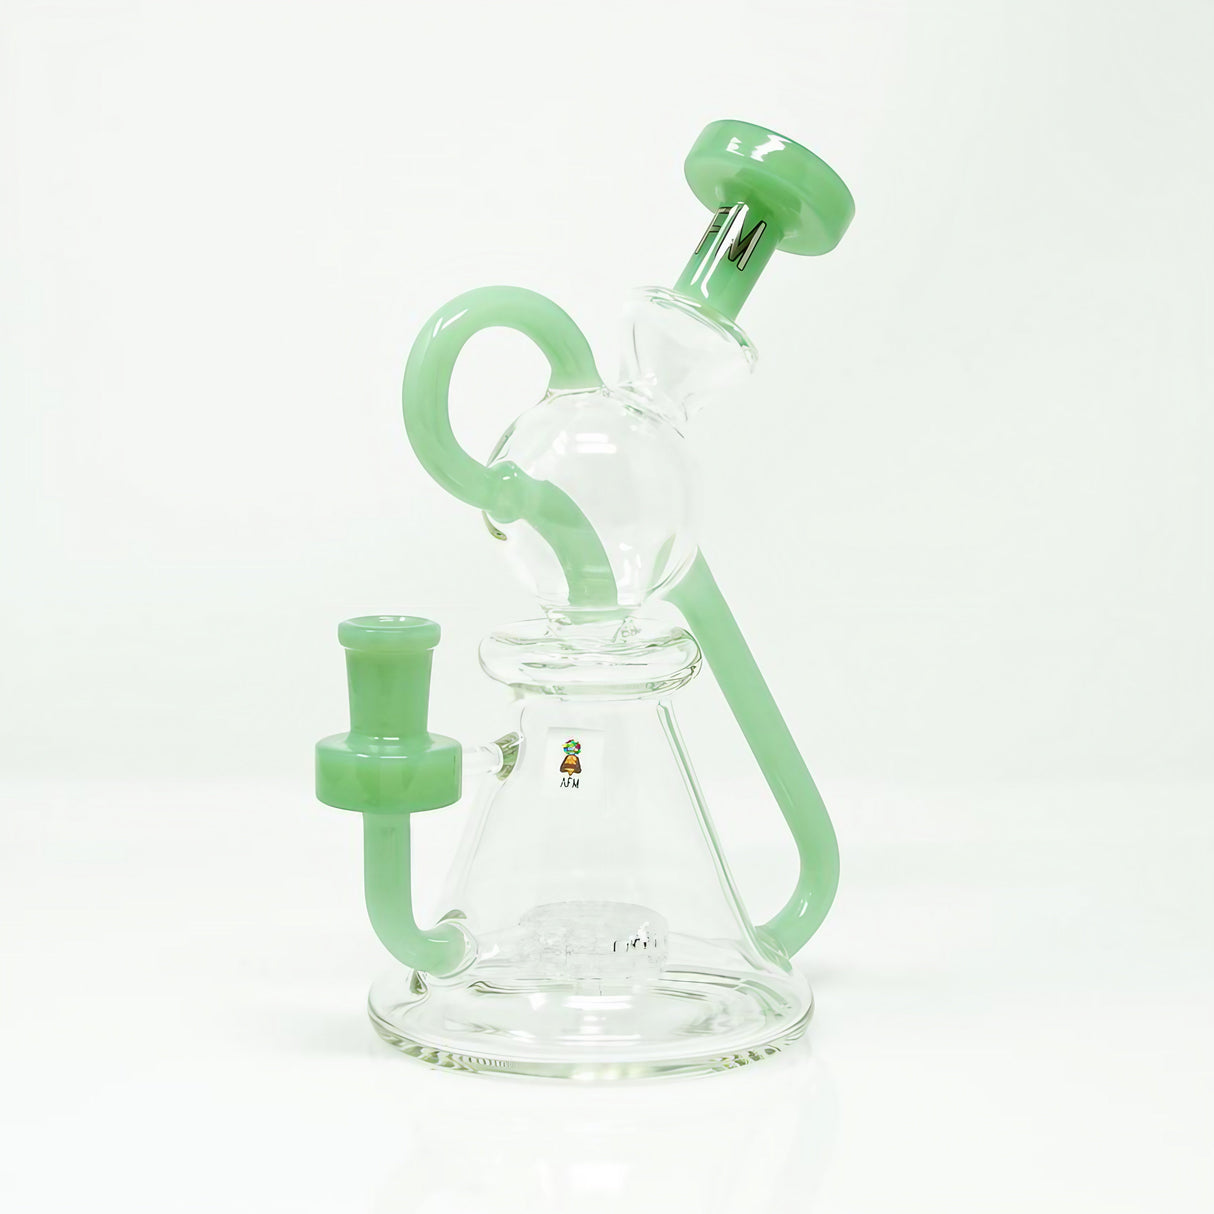 AFM Unicorn Recycler 8" Dab Rig with Slit-Diffuser Percolator, Front View on White Background